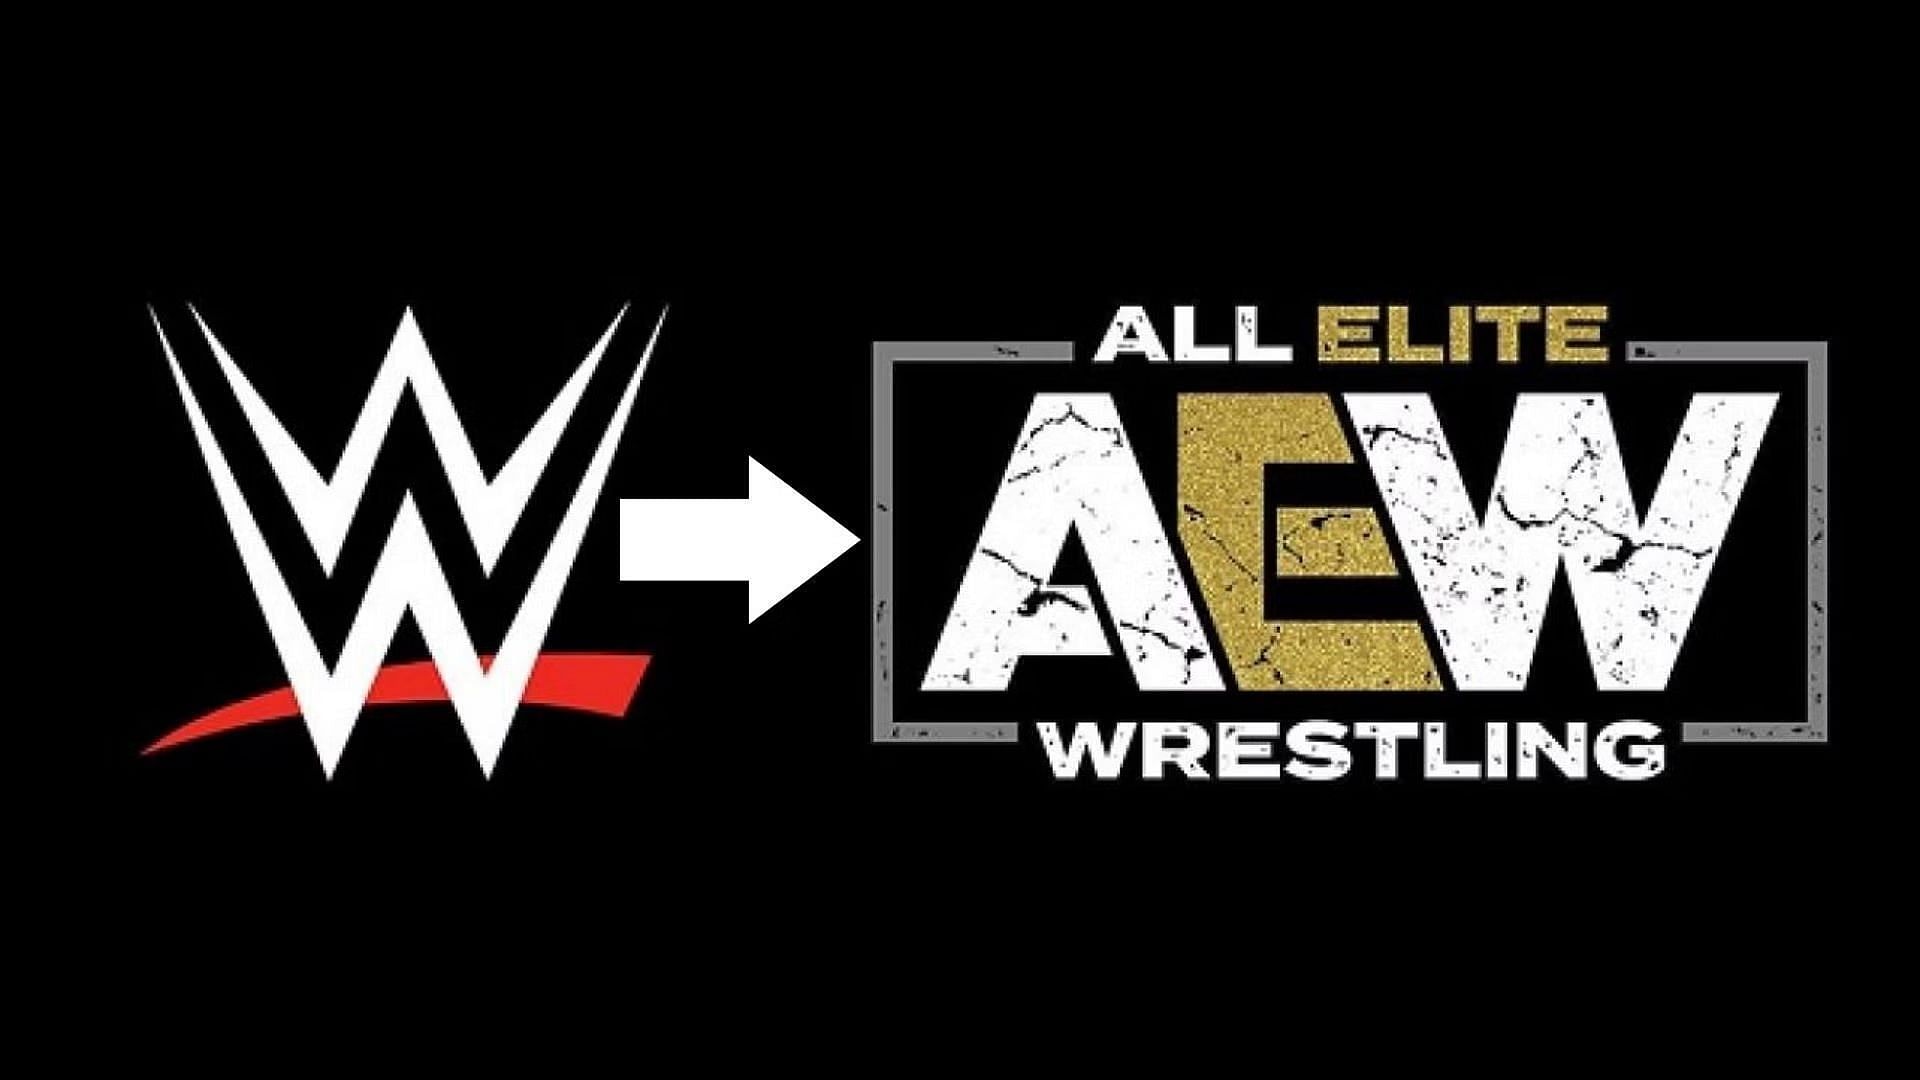 Many former WWE stars have made the switch to AEW 